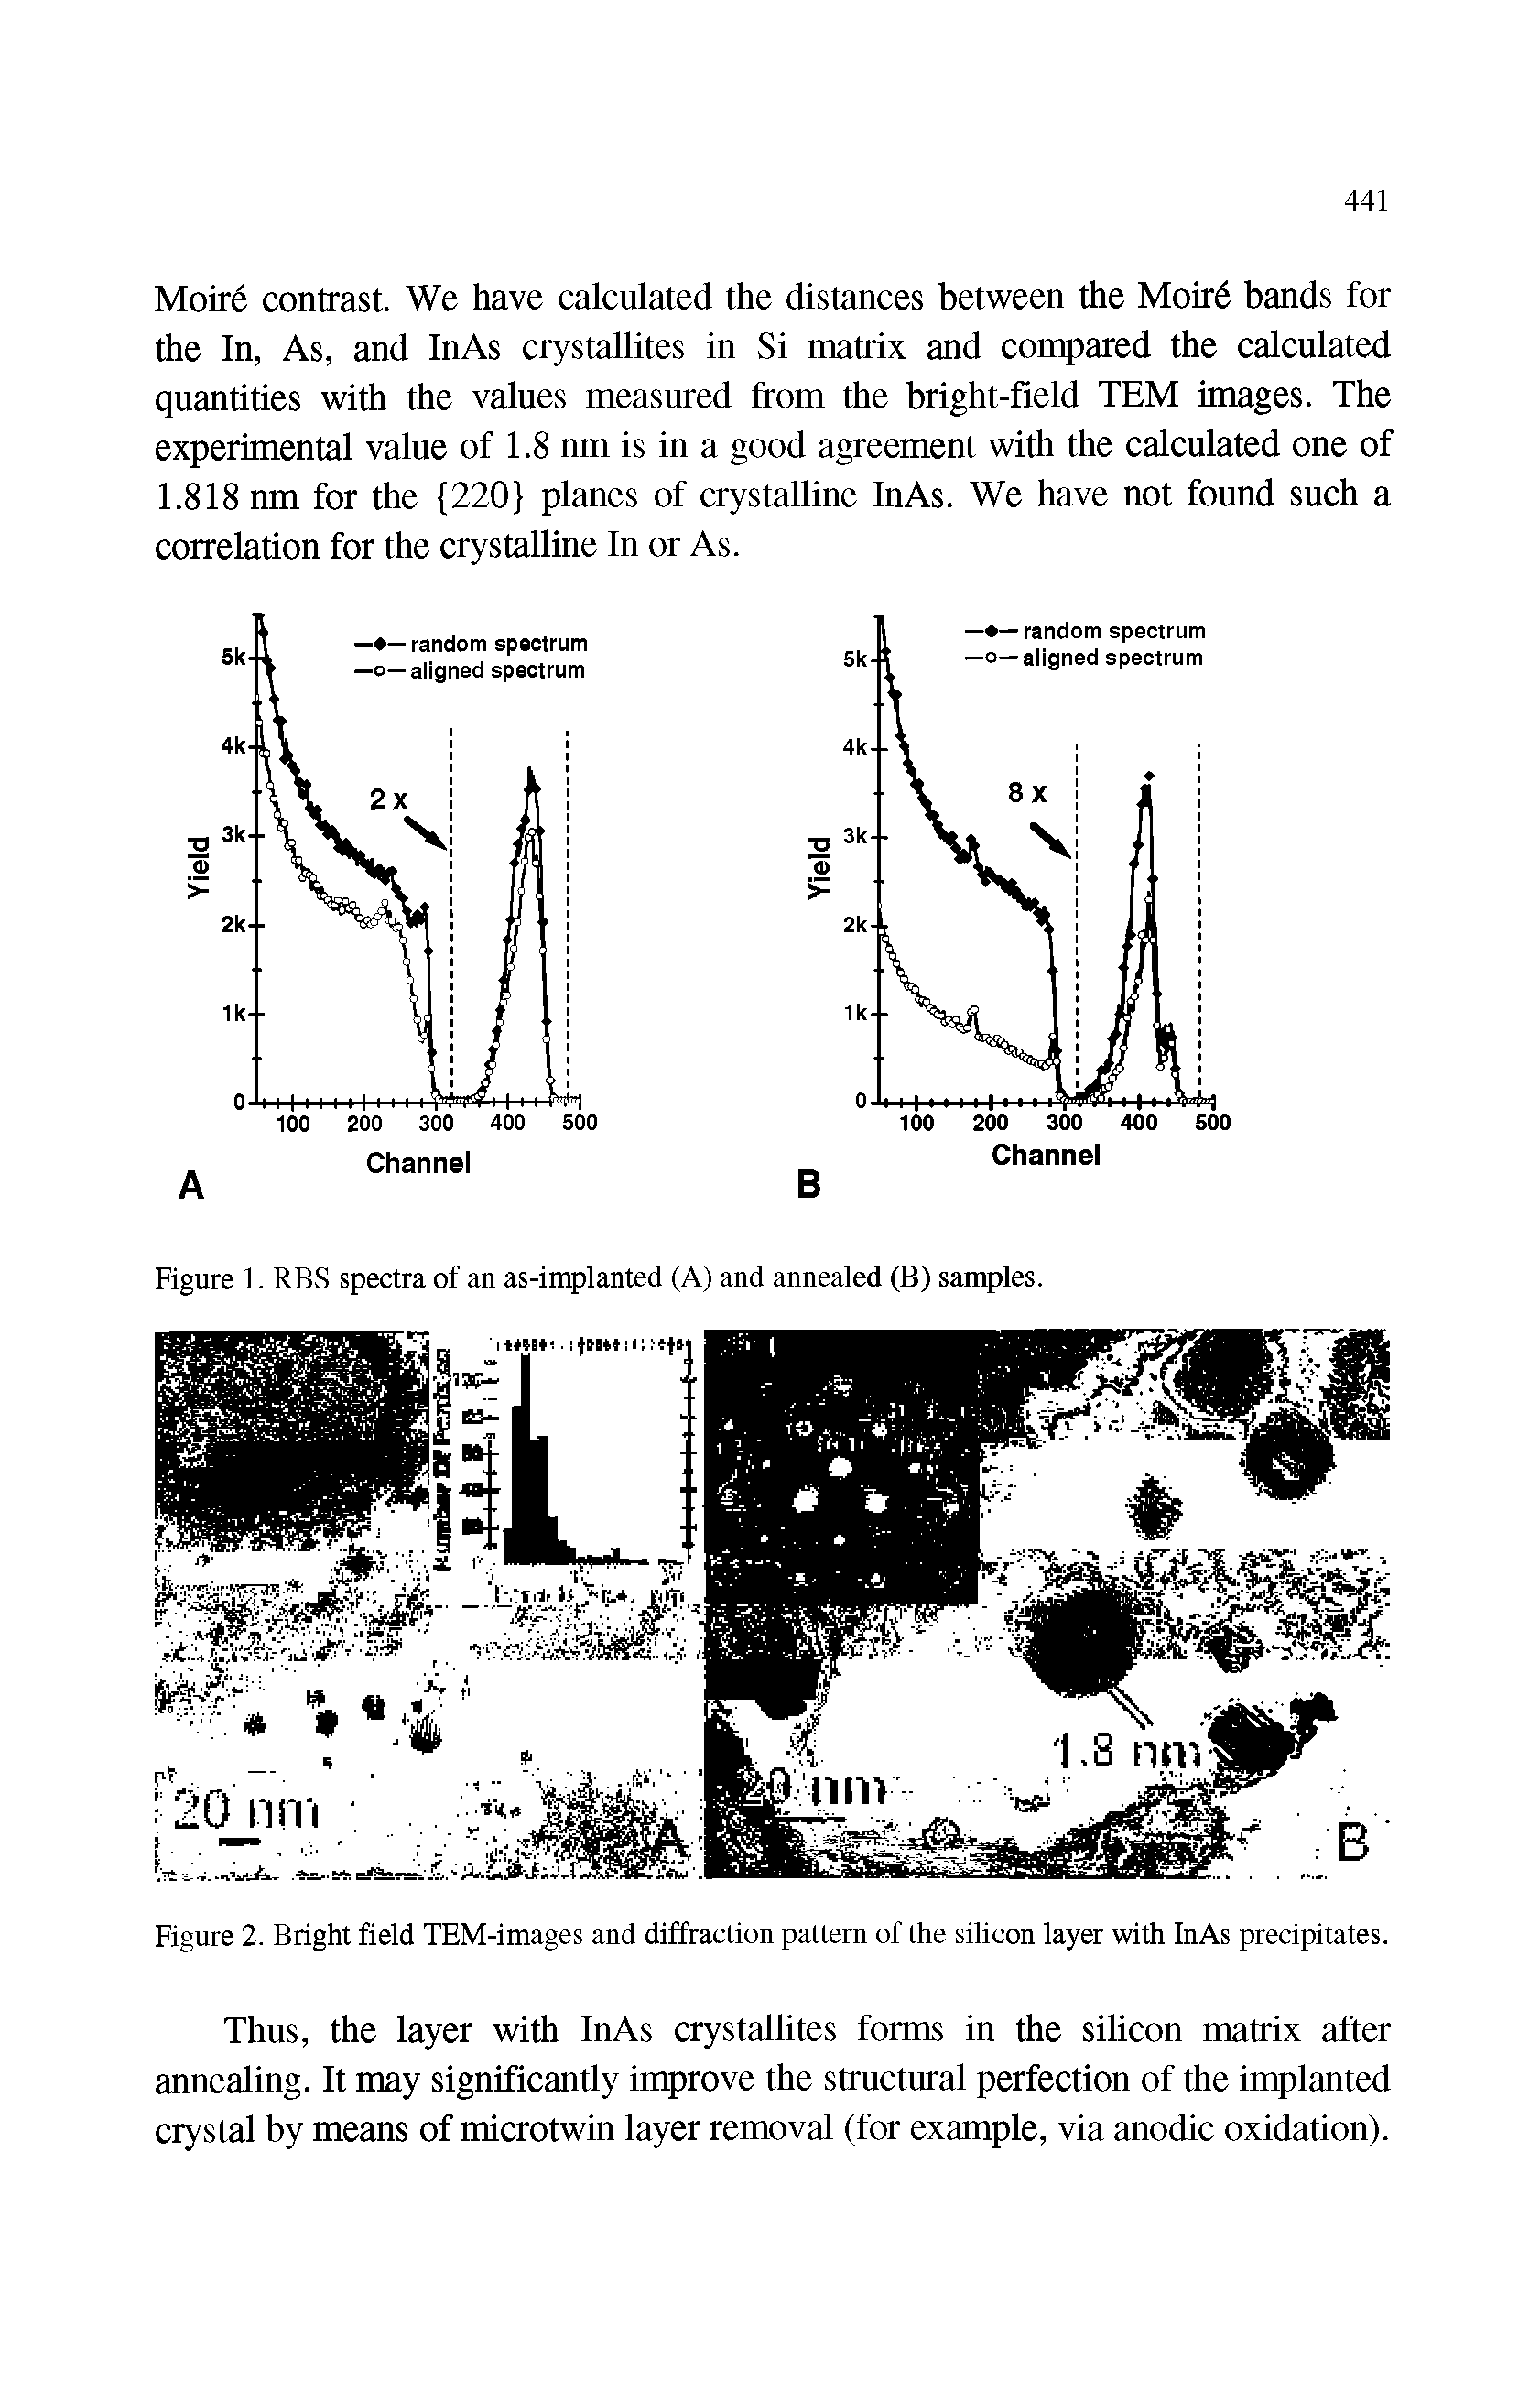 Figure 2. Bright field TEM-images and diffraction pattern of the silicon layer with InAs precipitates.